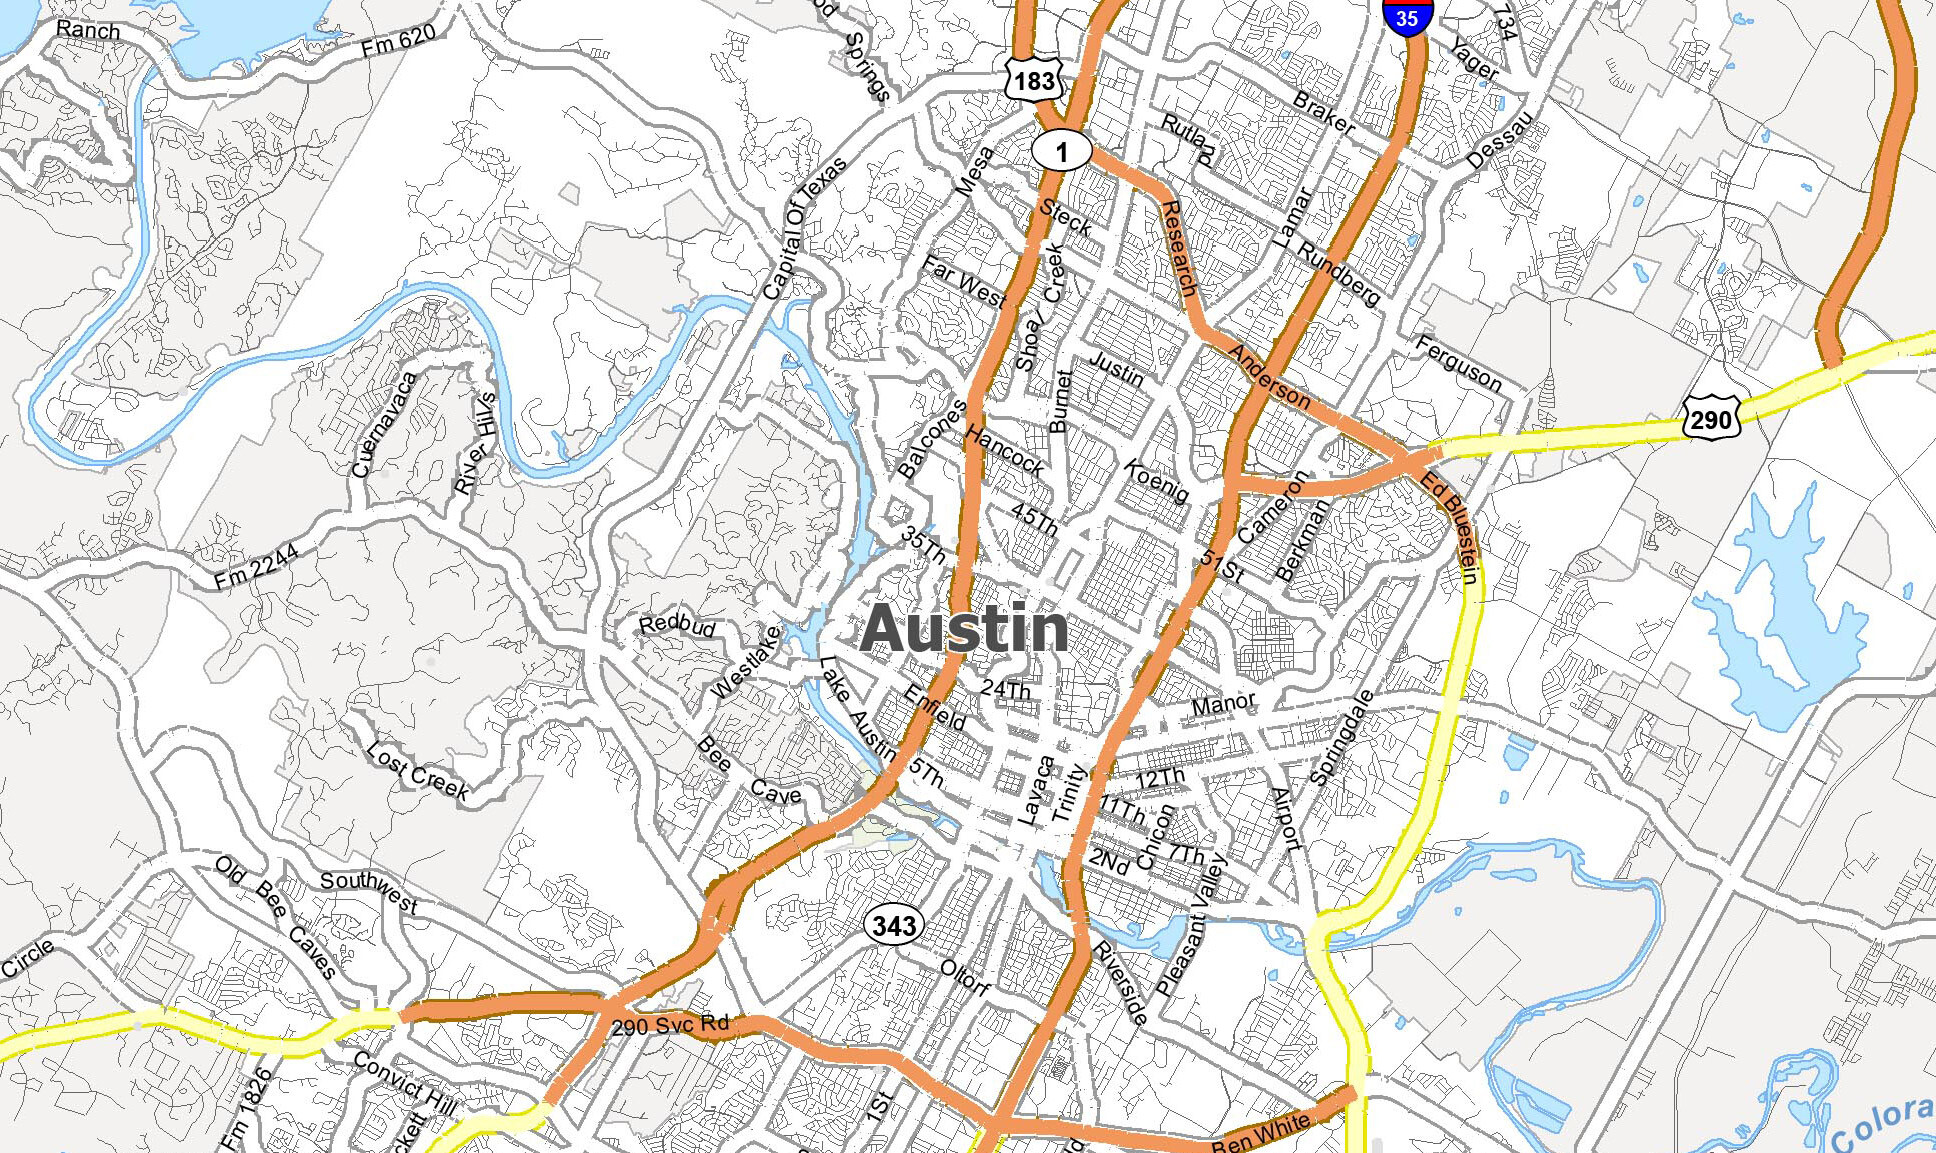  Map  of Austin  Texas  GIS Geography